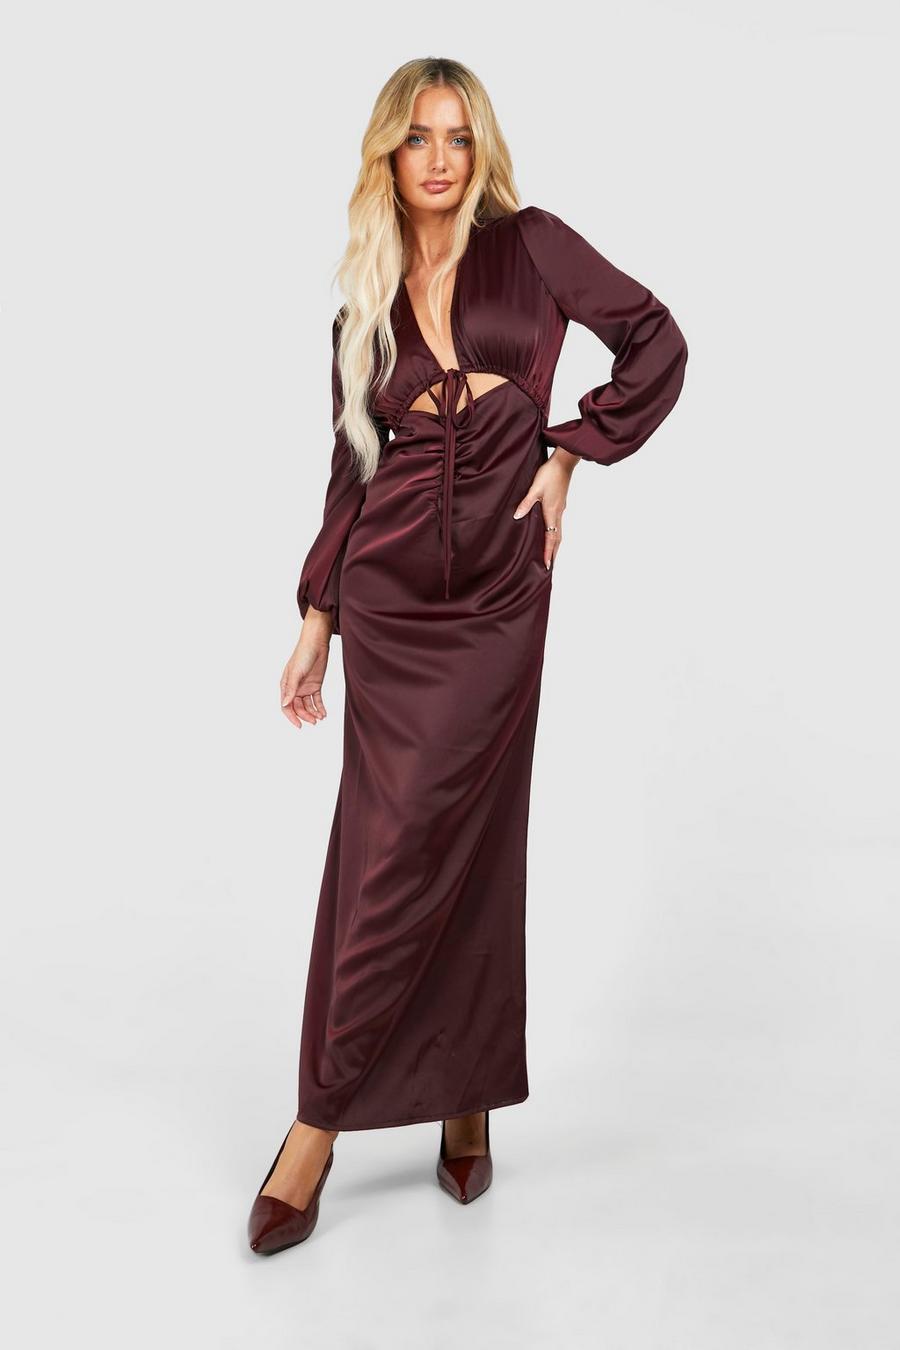 Chocolate Satin Ruched Cut Out Maxi Dress